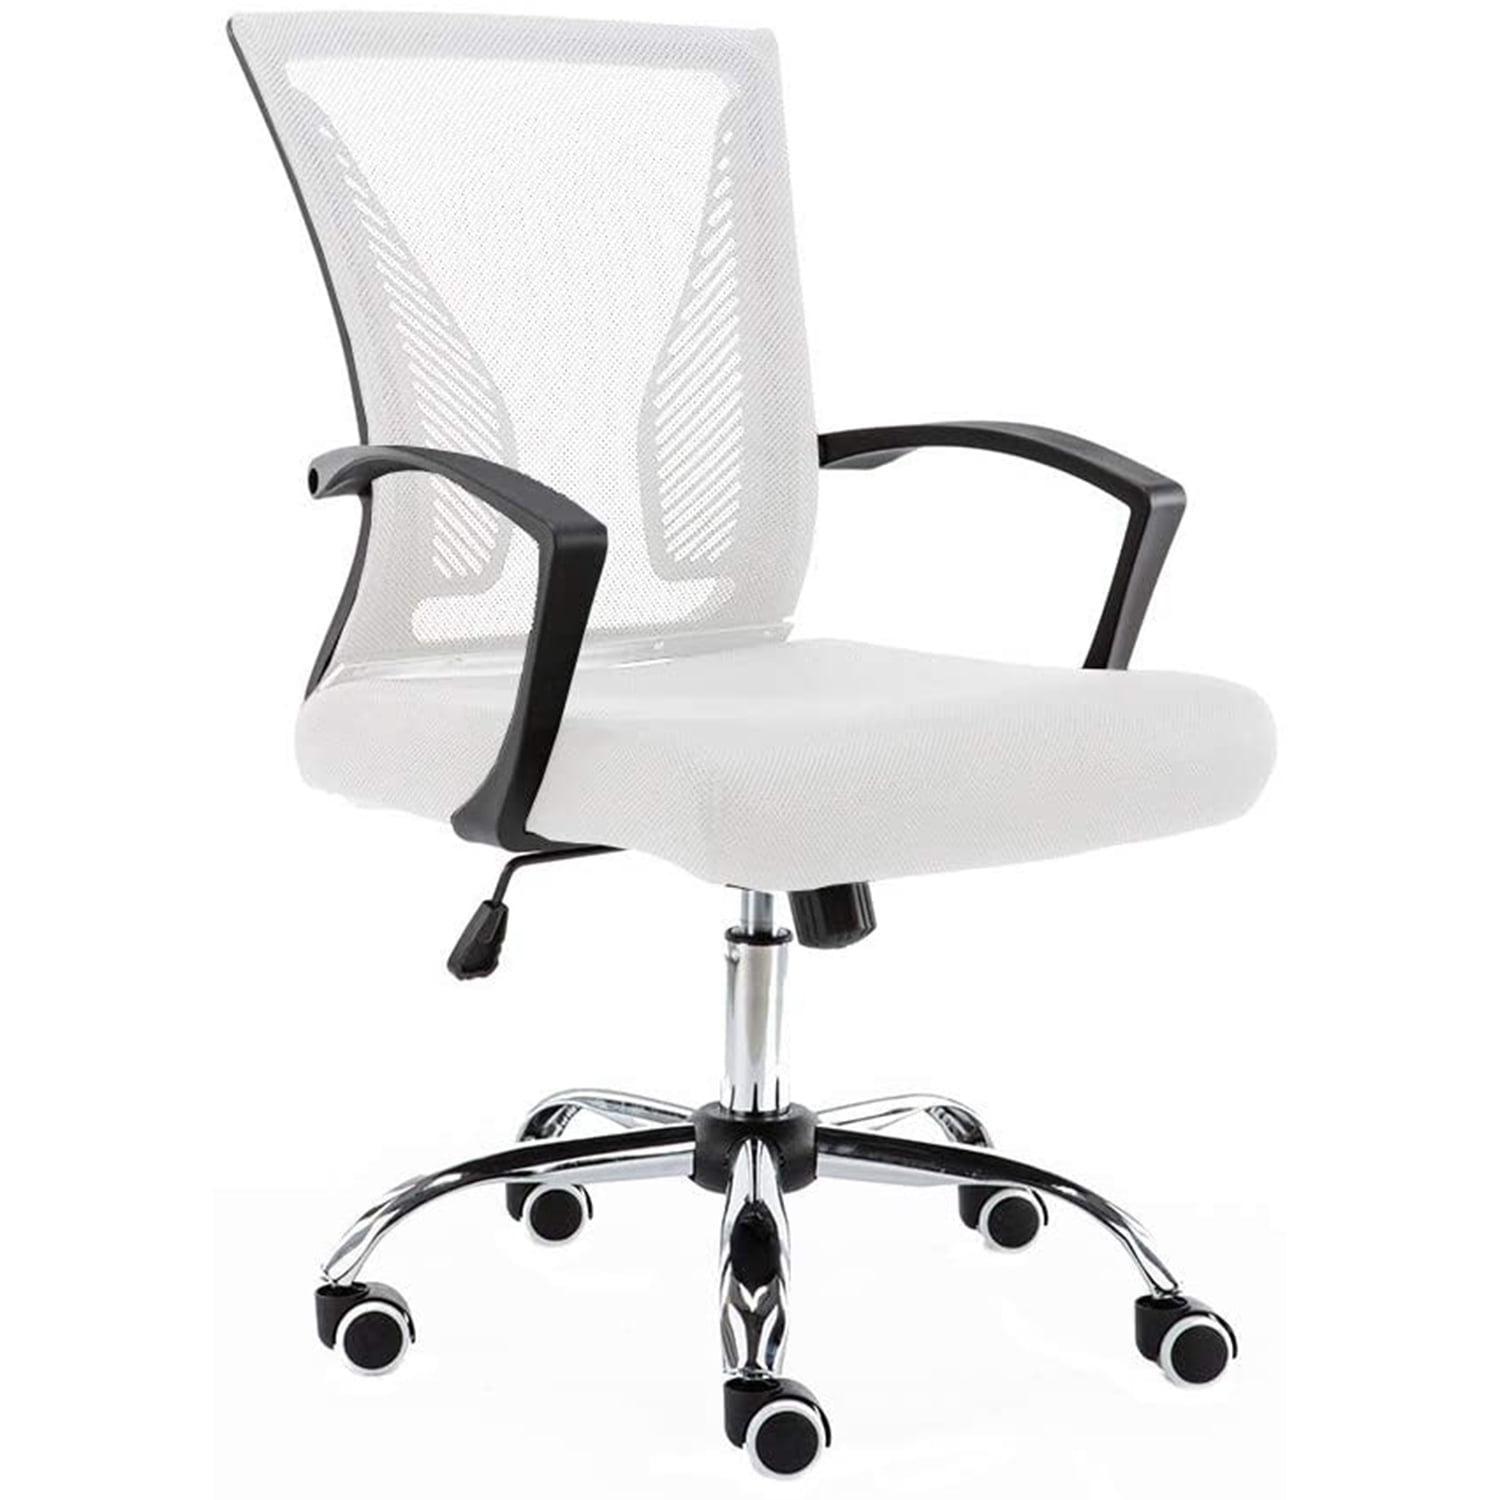 ADJUSTABLE HEIGHT ZUNA OFFICE DESK CHAIR NEW MID-BACK MESH TASK CHAIR 